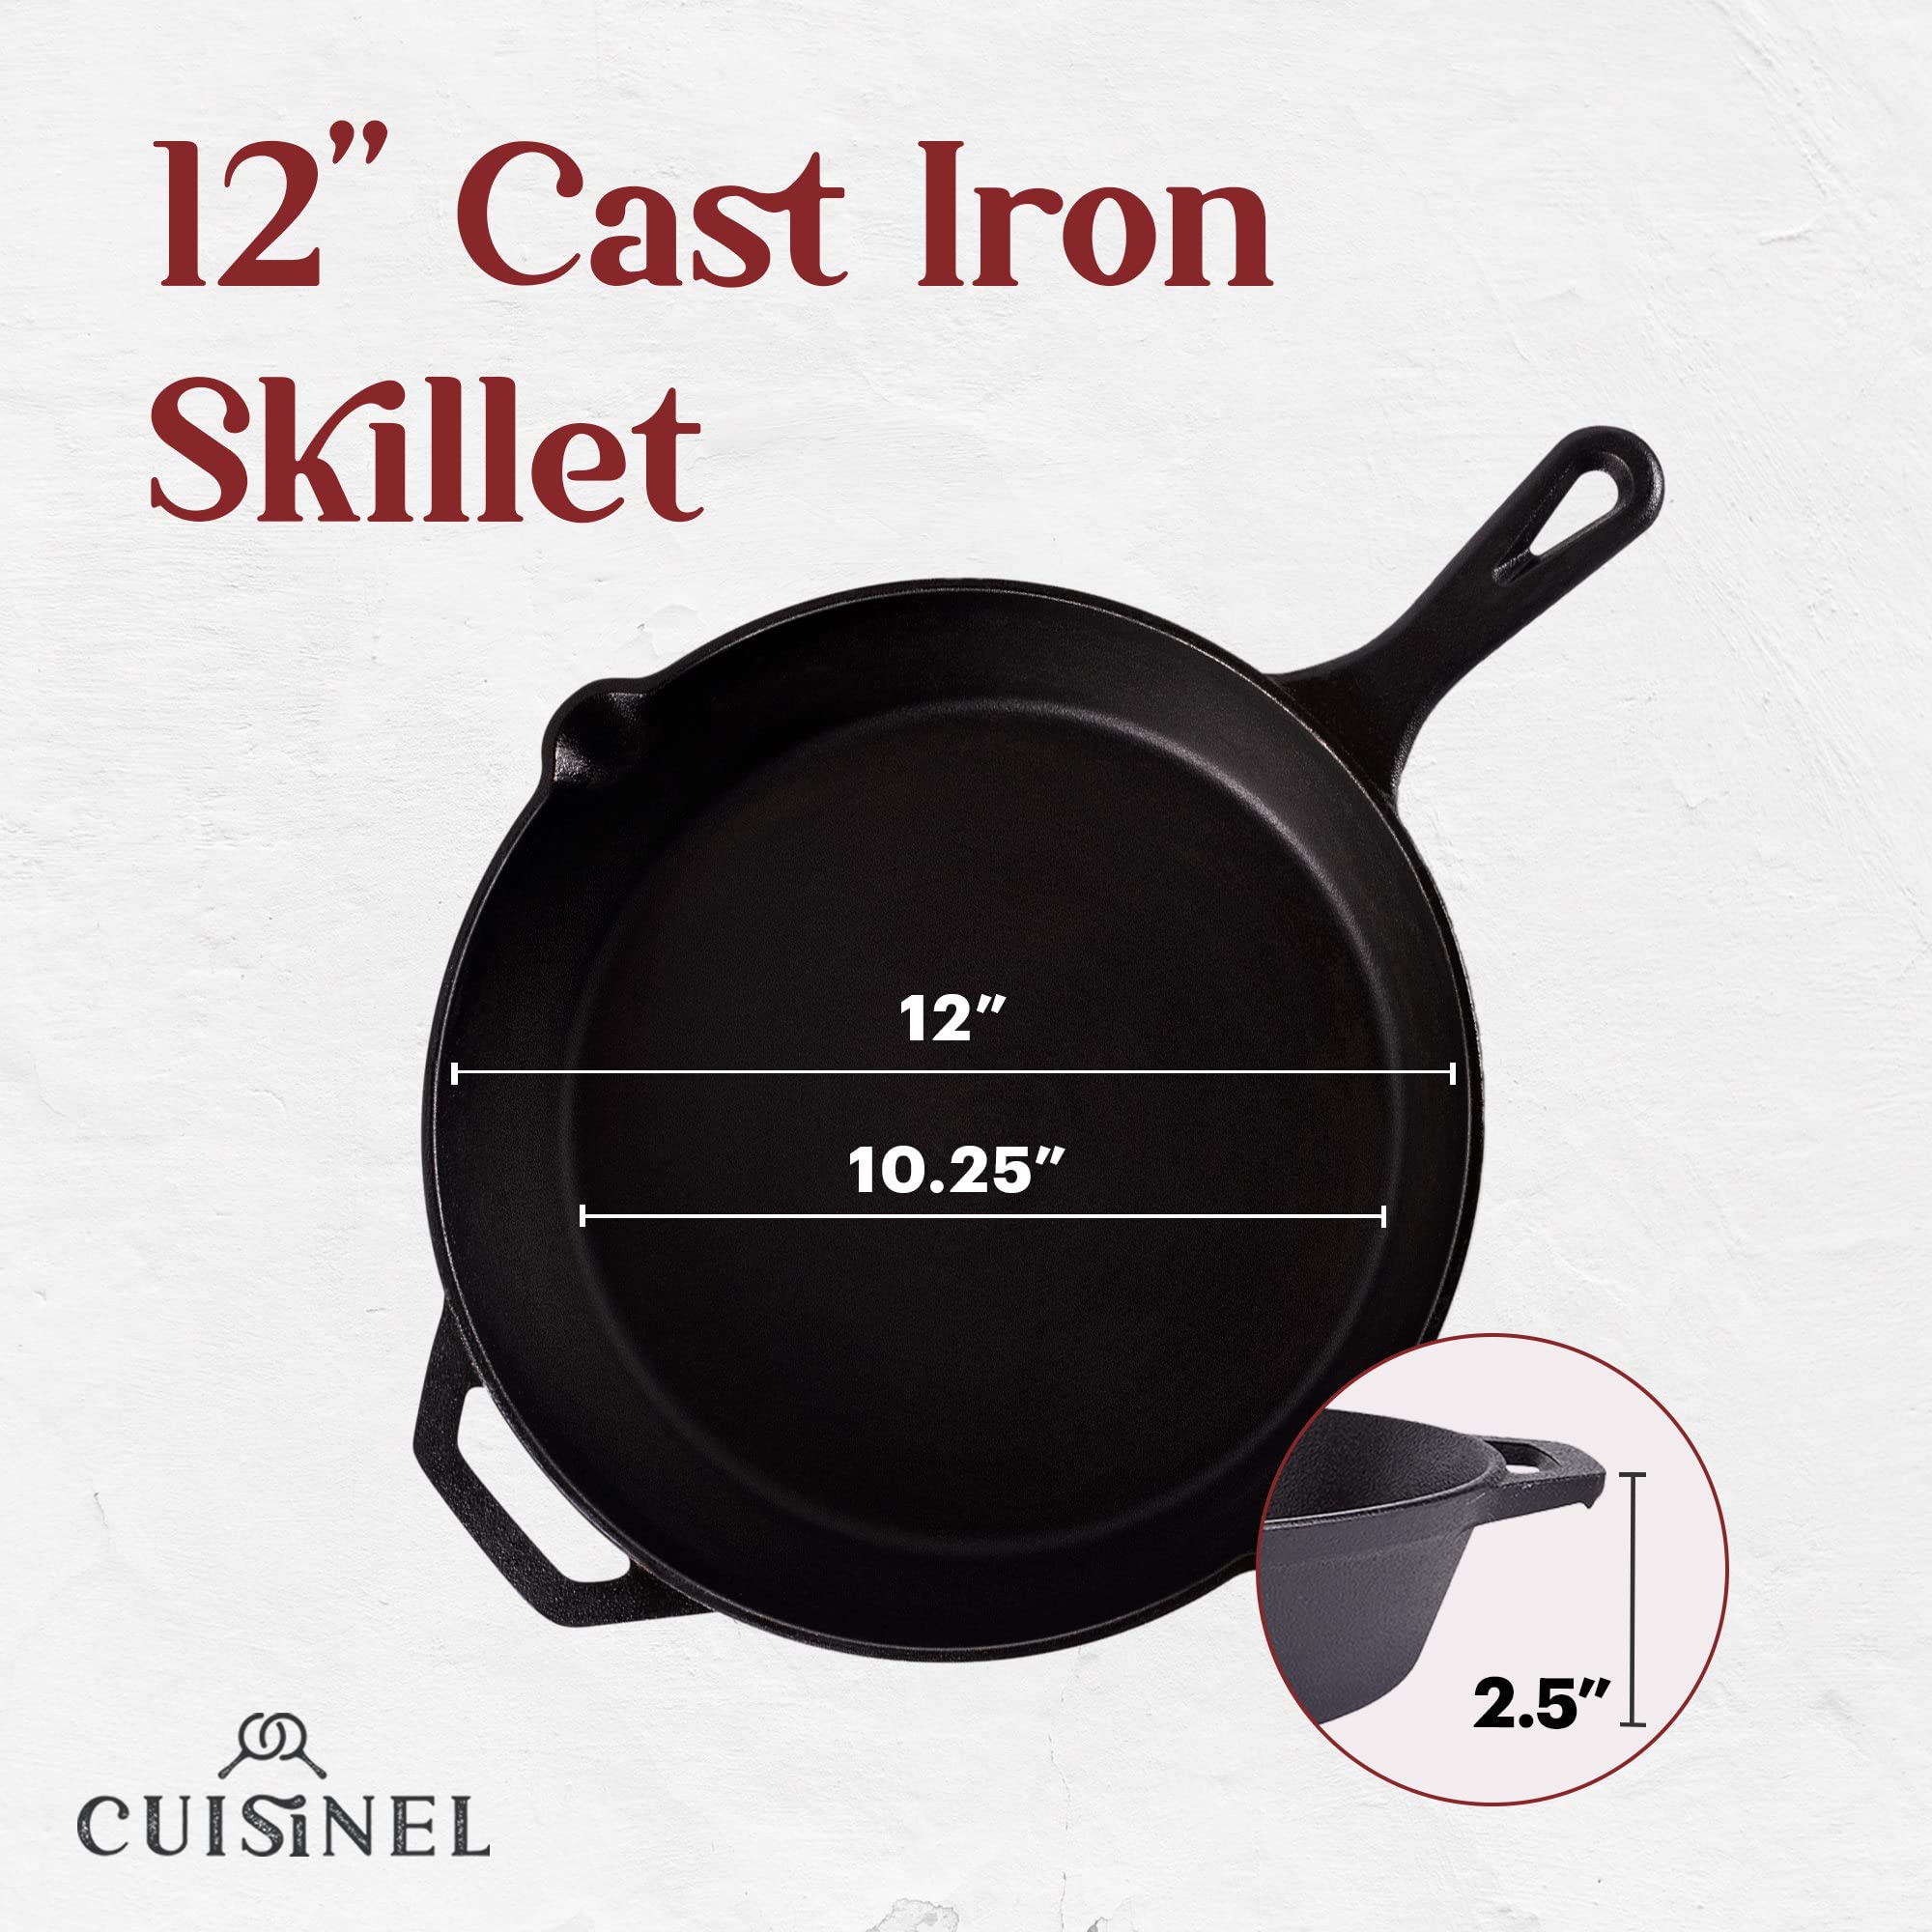 Cuisinel Cast Iron Skillet with Lid - 12"-Inch Frying Pan + Glass Cover + Silicone Handle Holder - Pre-Seasoned Oven Safe Cookware - Indoor/Outdoor Use - Grill, BBQ, Fire, Stovetop, Induction  - Good